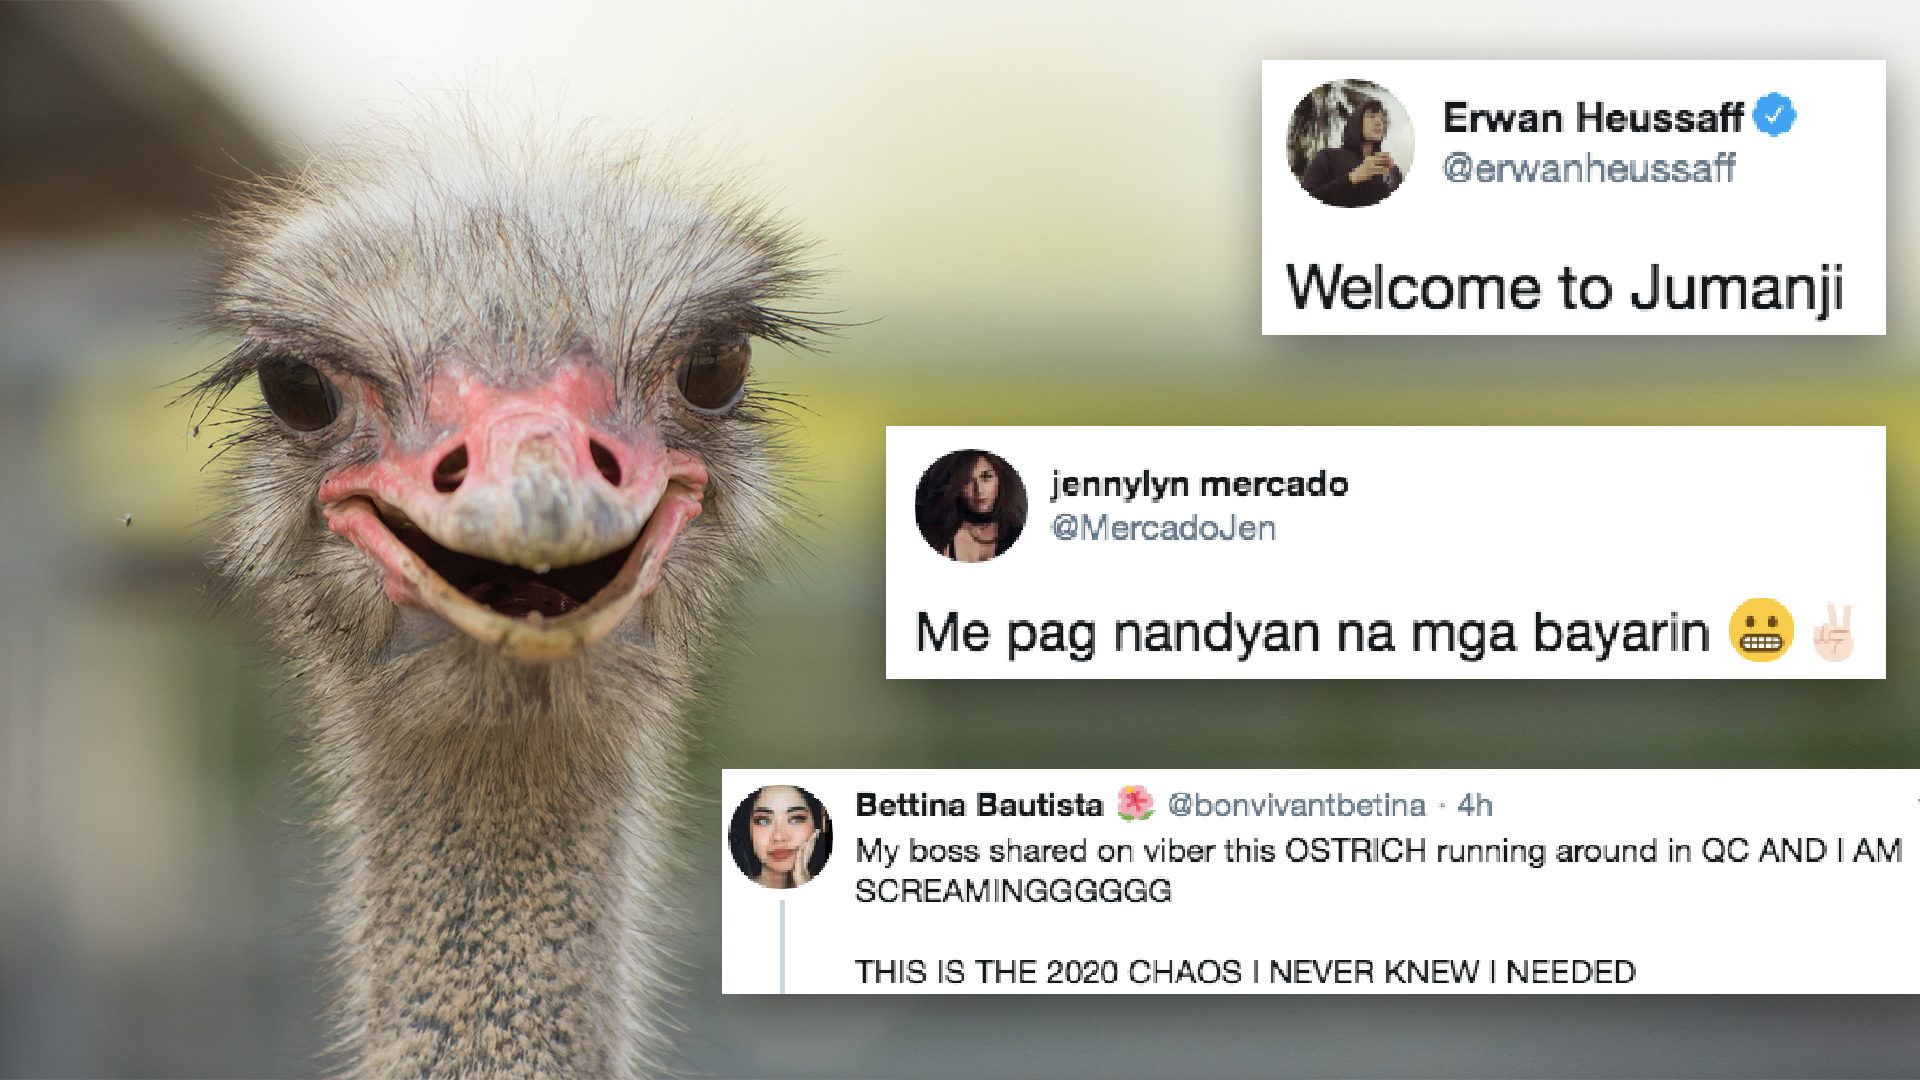 It’s been a Jumanji year so far: Loose ostrich in QC trends online